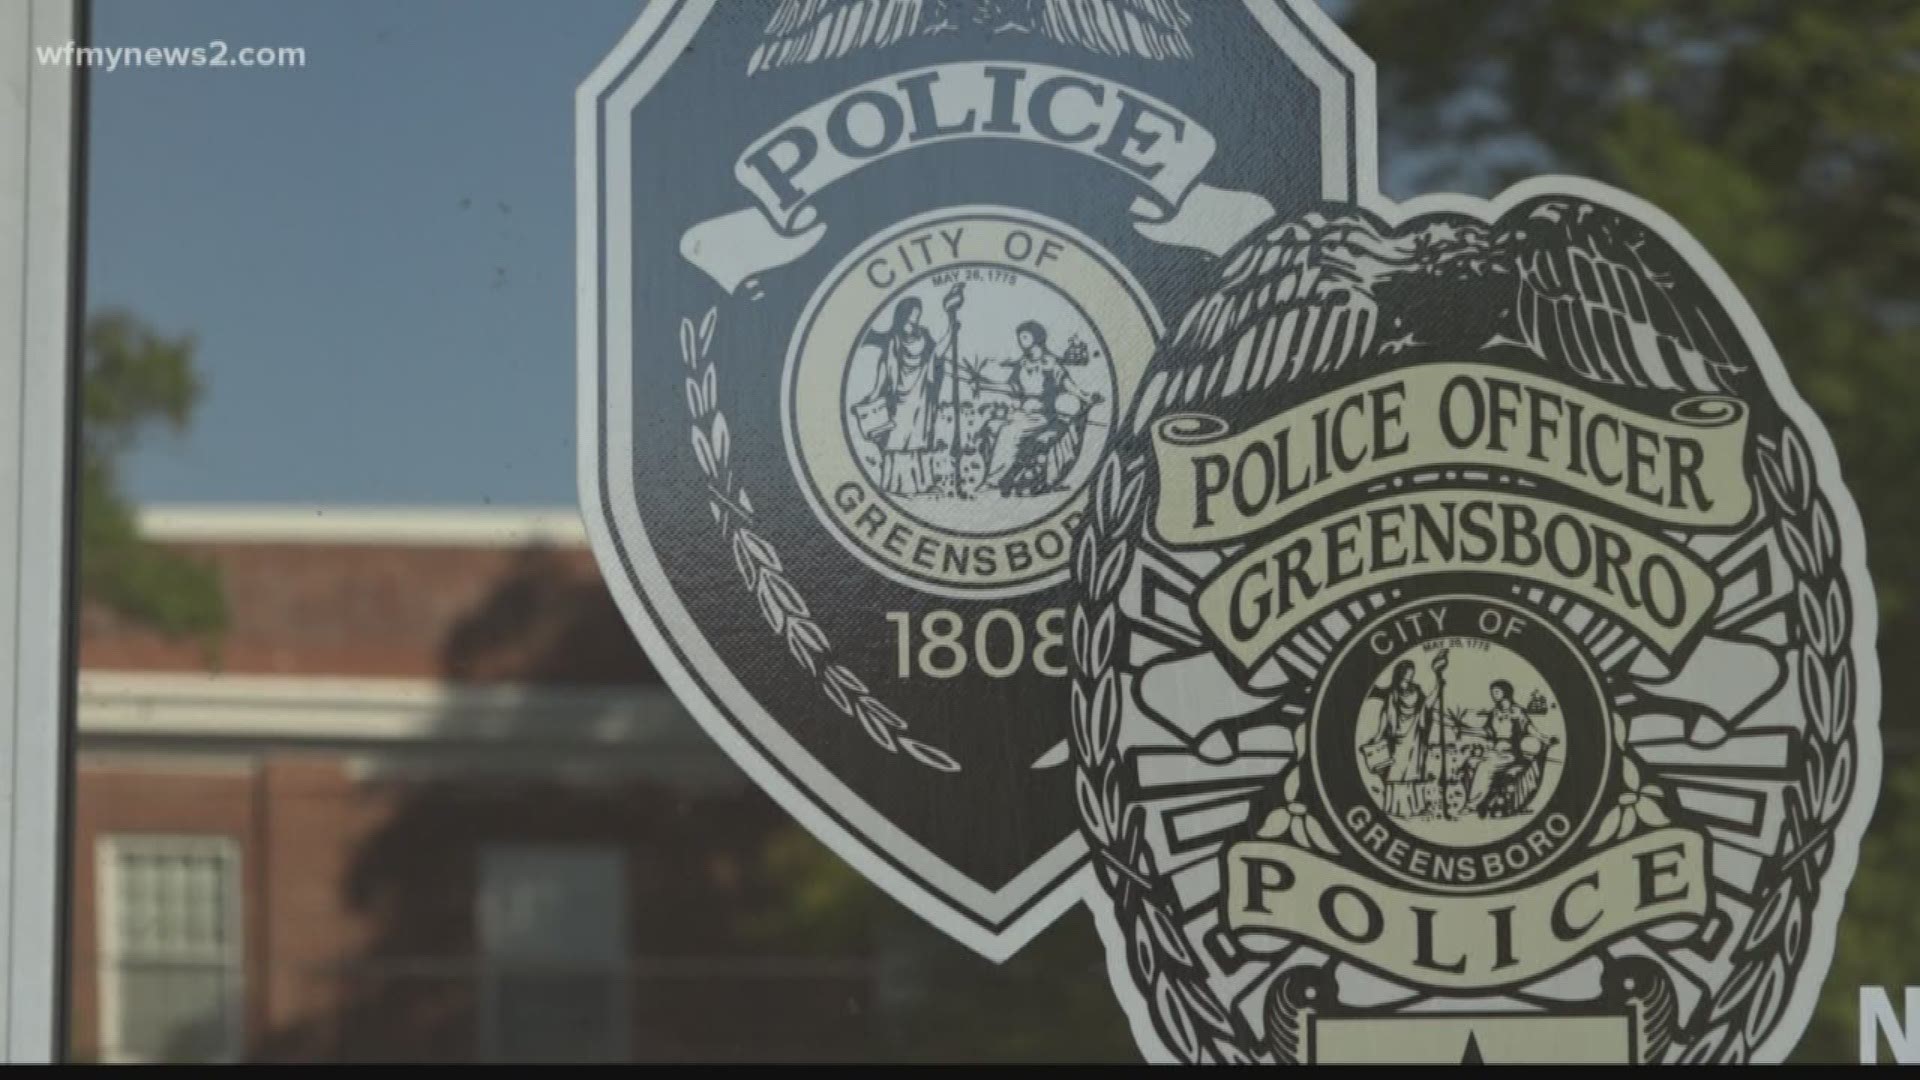 Greensboro police say it takes help from the community to curb gang activity.